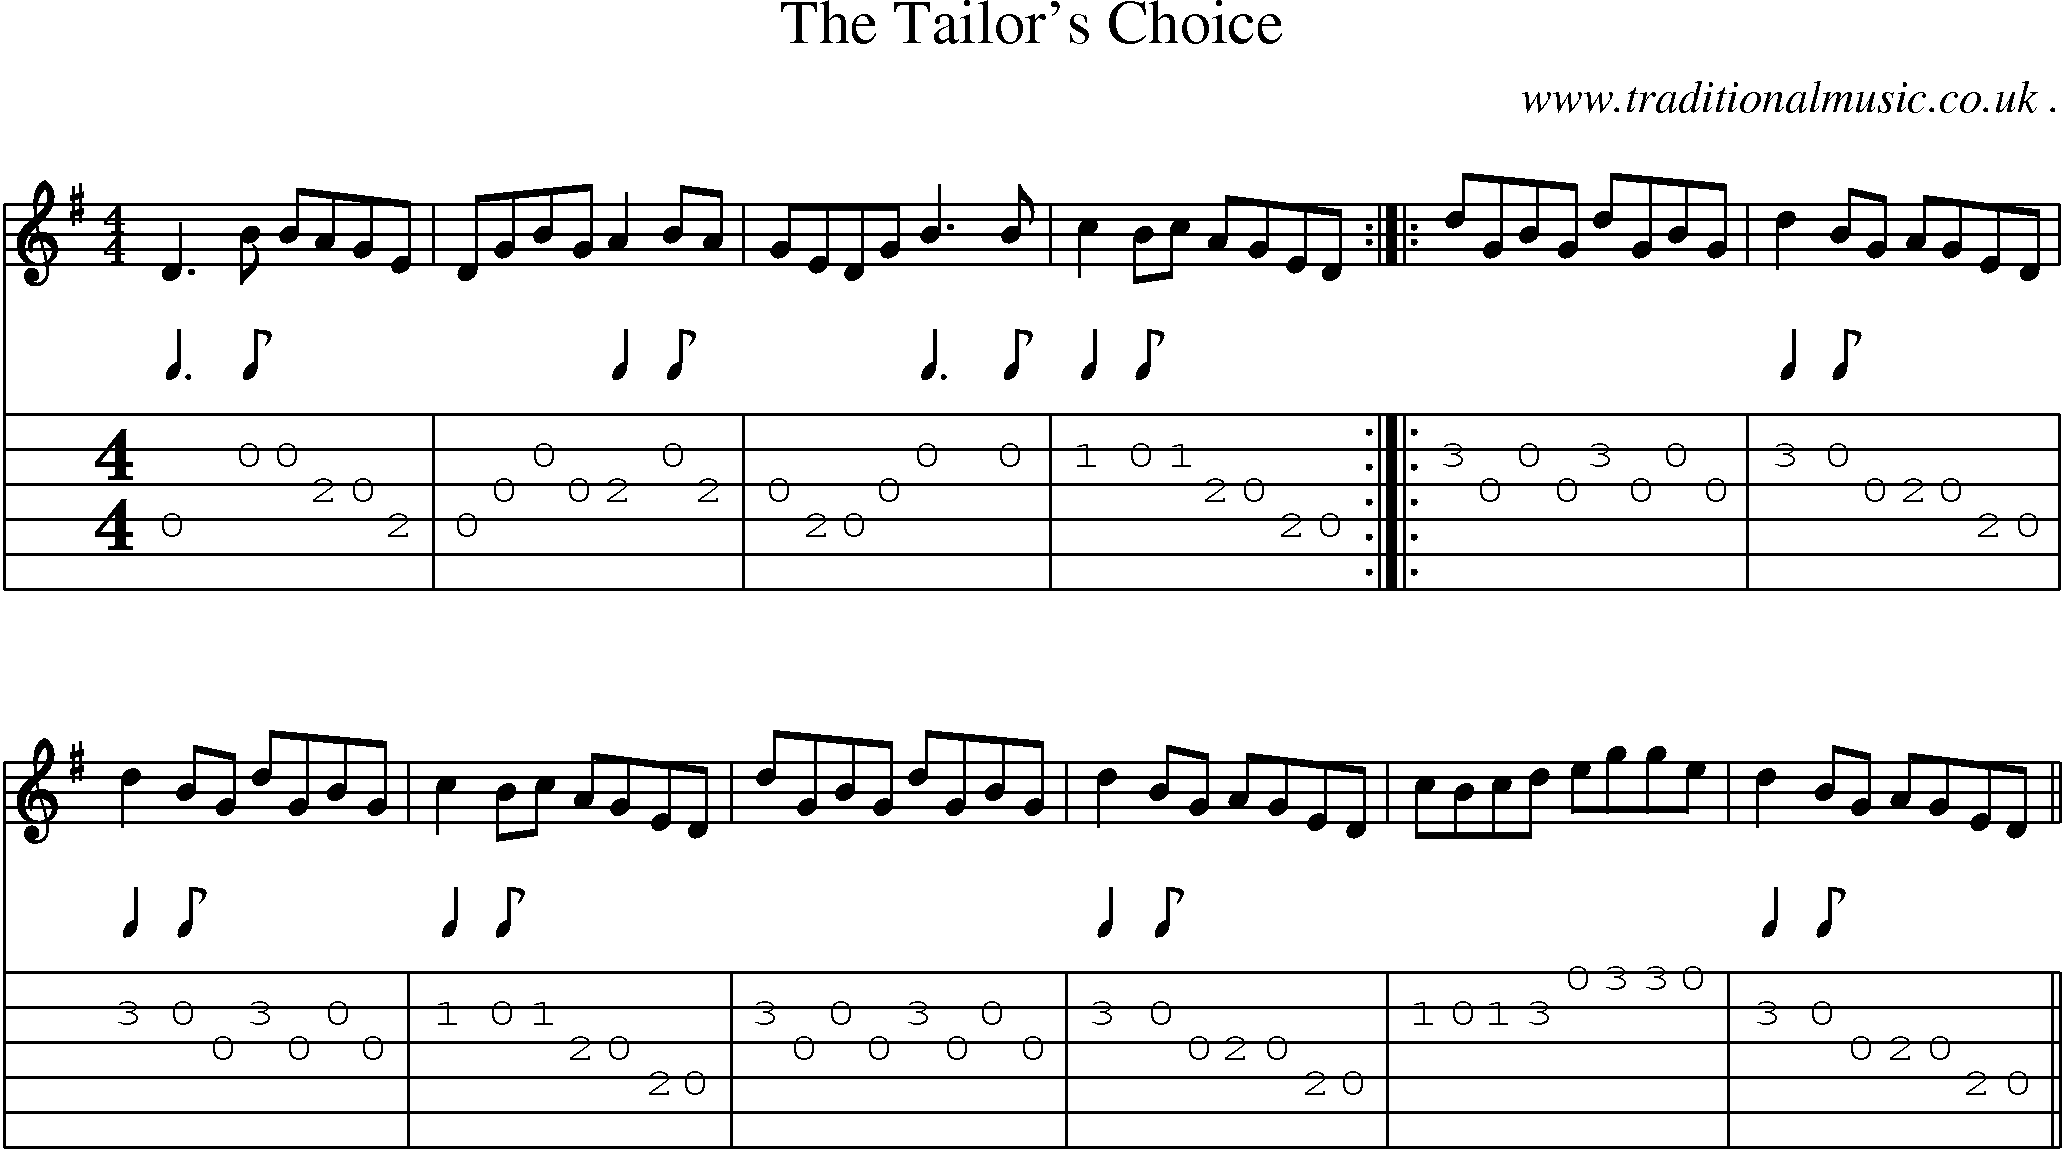 Sheet-Music and Guitar Tabs for The Tailors Choice